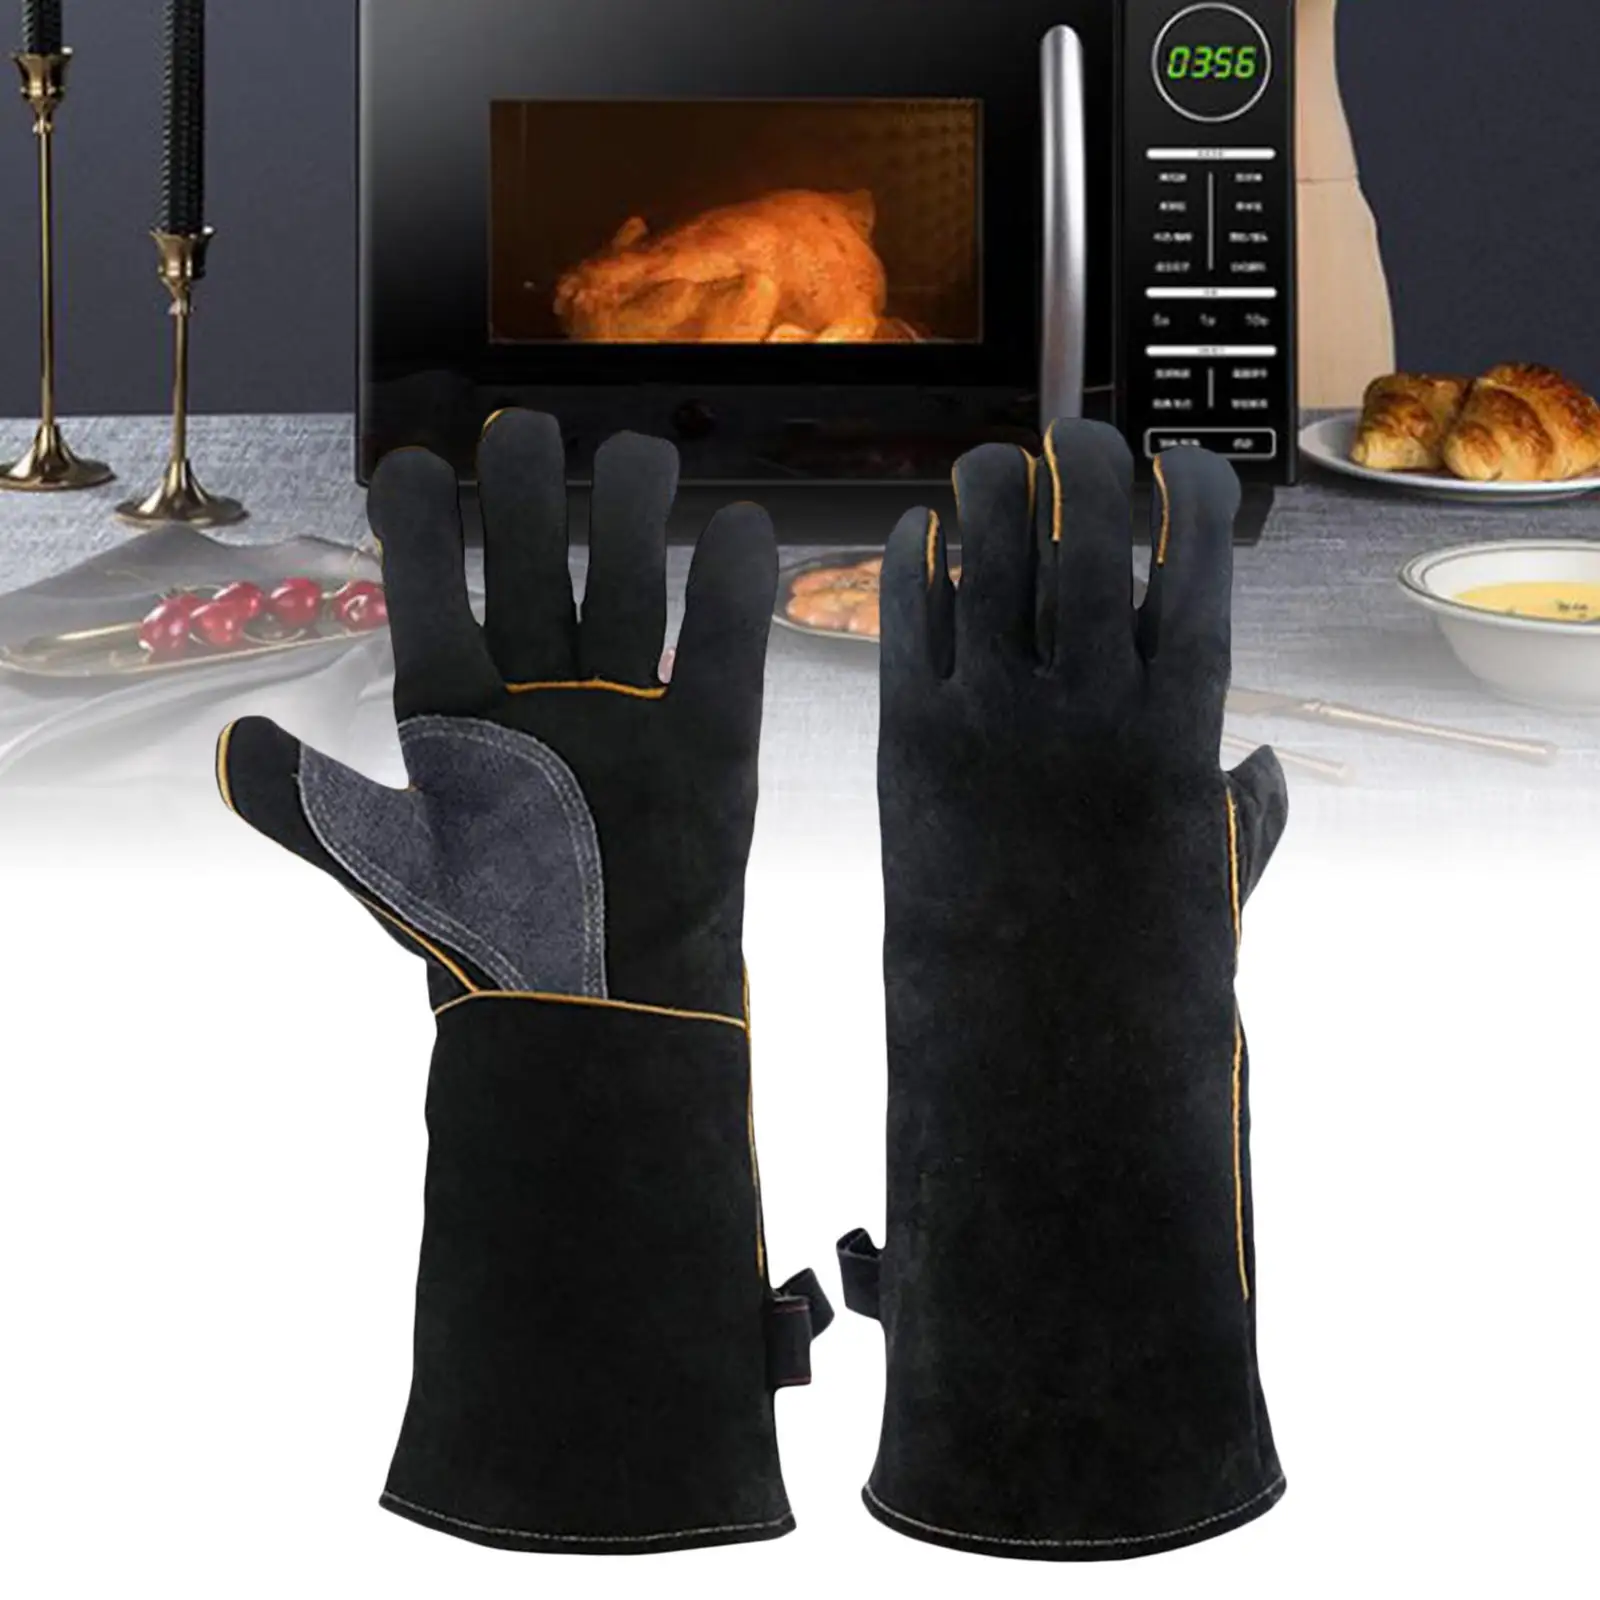 

Heat Resistant BBQ Gloves 16" Leather Professional Anti-Slip Fireproof Oven Mitts for Stove Fireplace Cooking Furnace Pot Holder